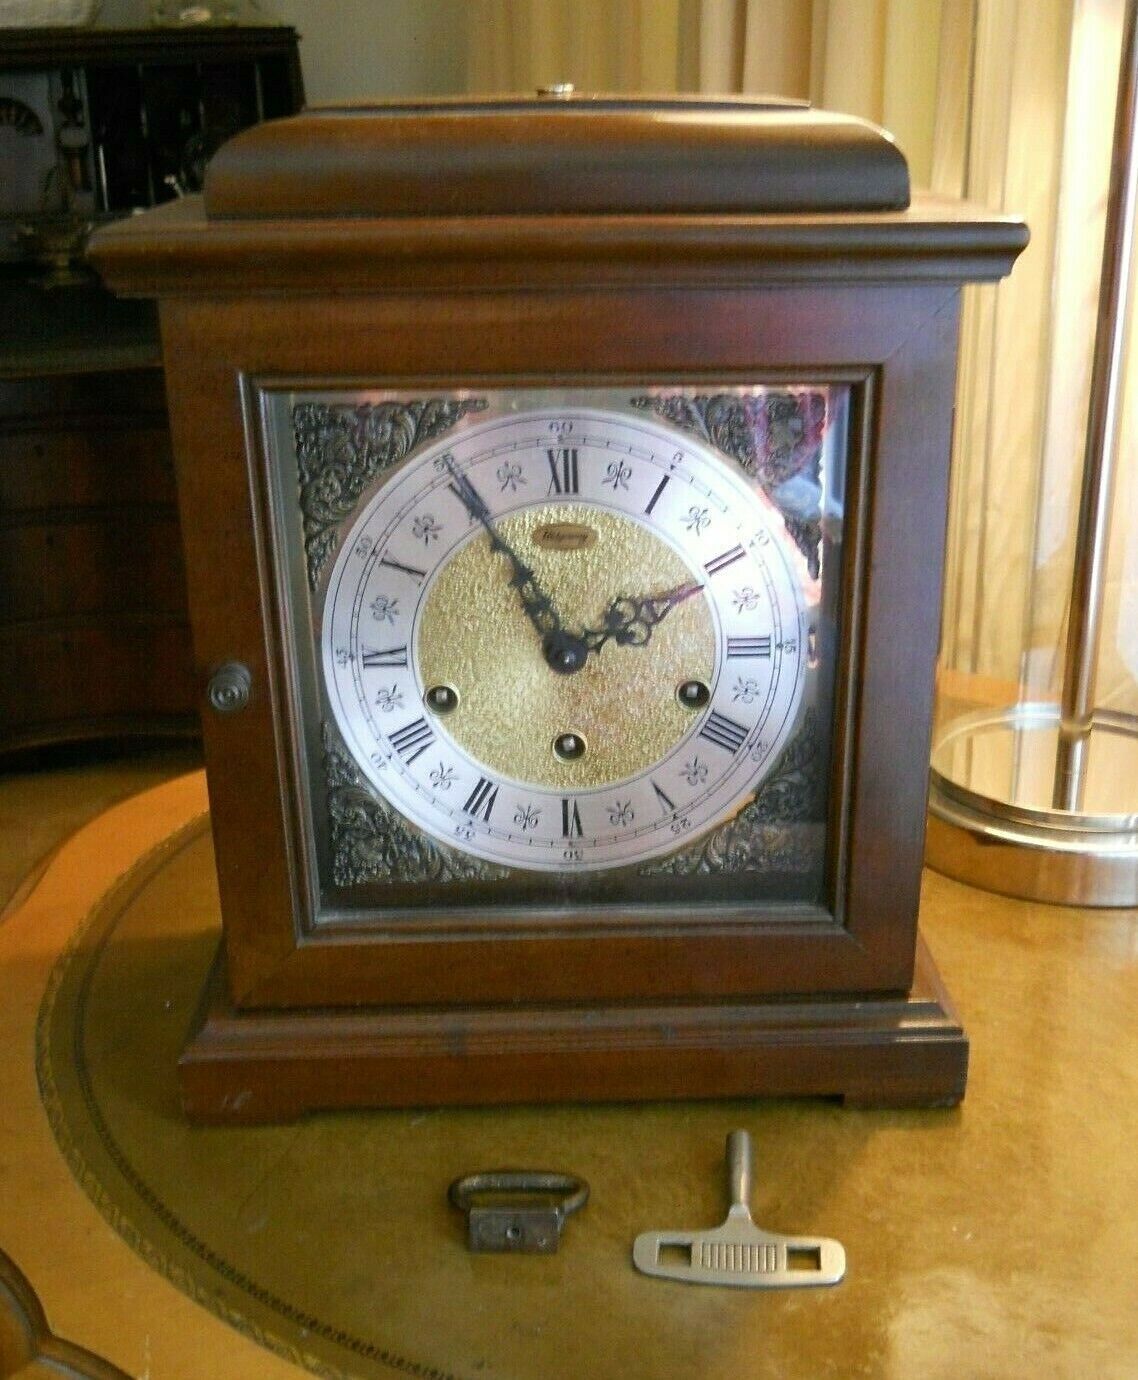 STATELY VINTAGE RIDGEWAY MANTLE CLOCK TWO JEWELS HERMLE MOVEMENT WEST GERMANY 